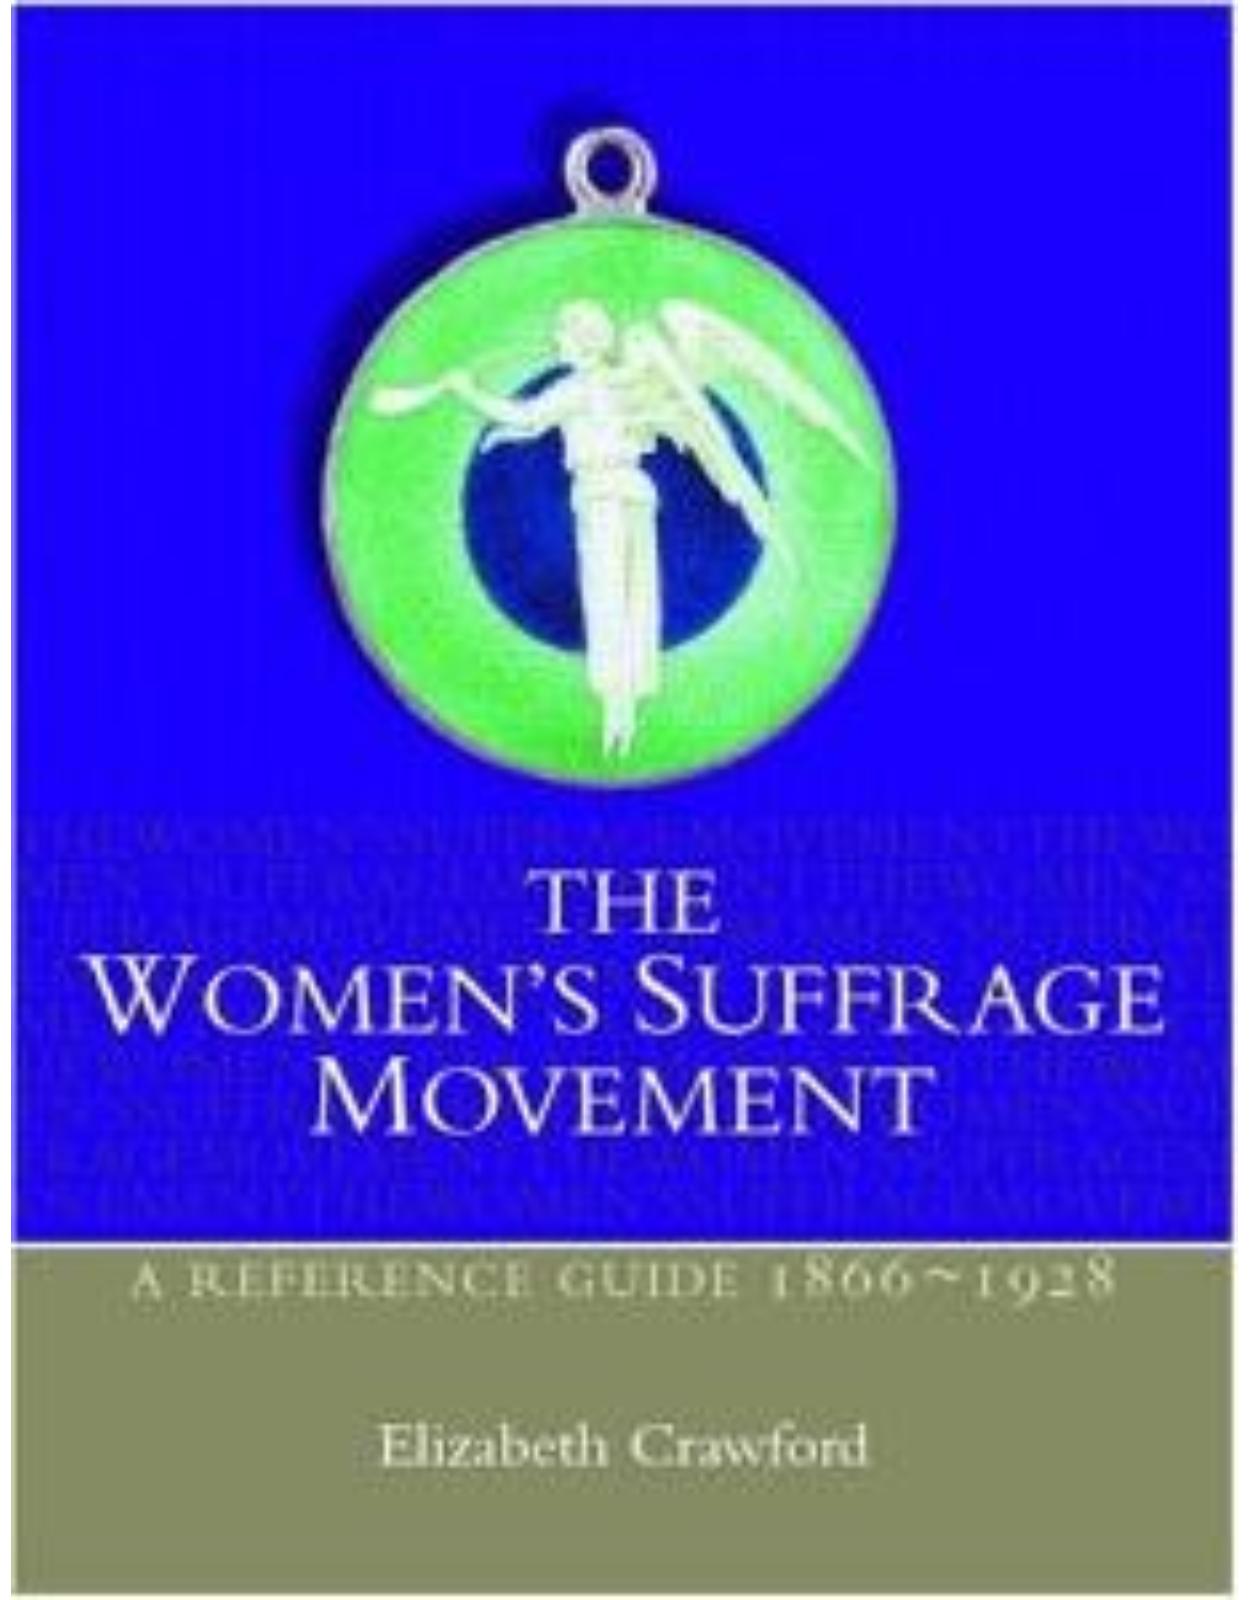 The Women's Suffrage Movement: A Reference Guide 1866-1928